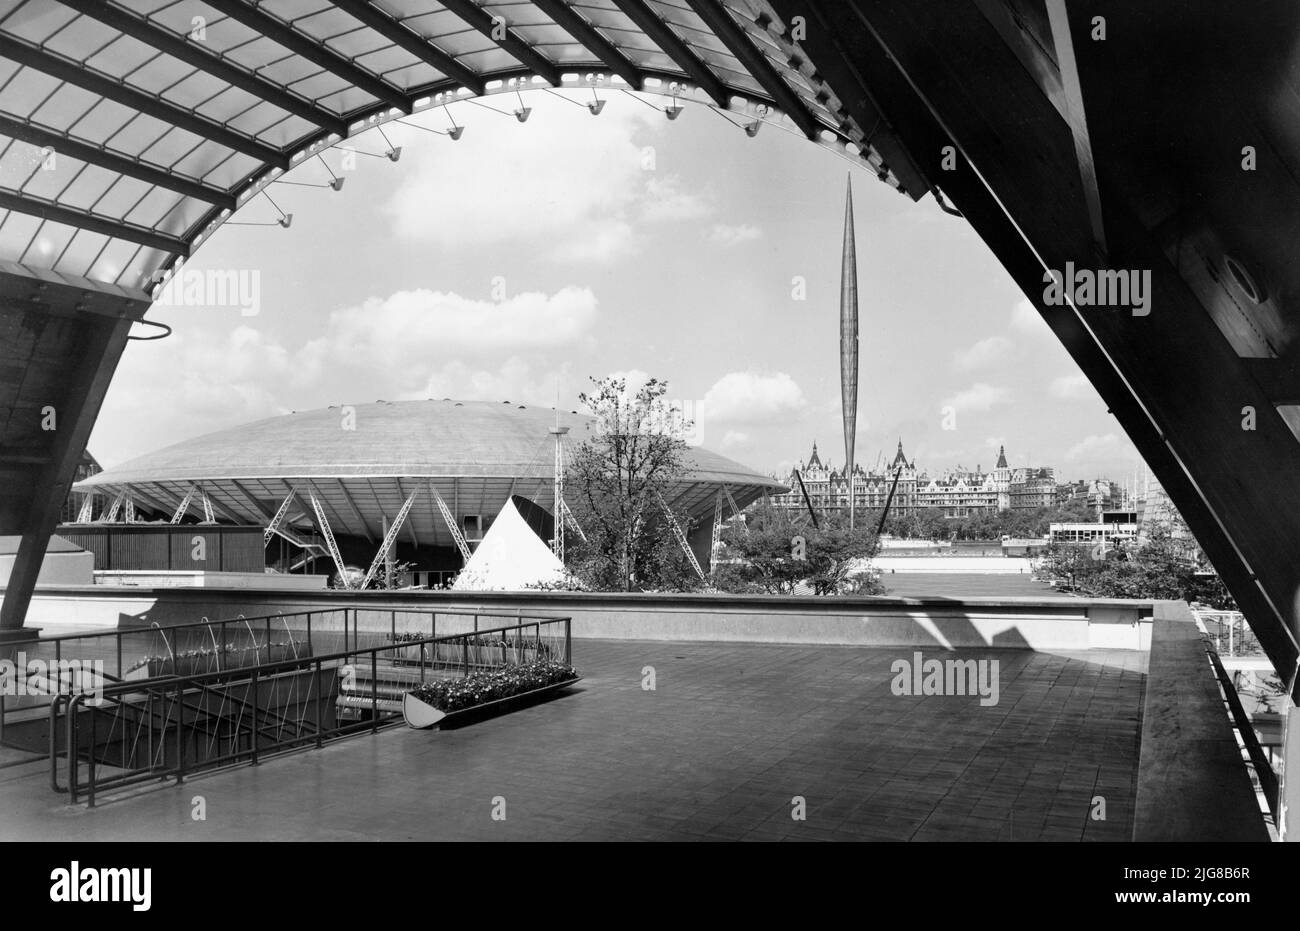 Festival of Britain, South Bank Exhibition, Belvedere Road, South Bank, Lambeth, Greater London Authority, 15-06-1951. The upstream section of the Festival of Britain exhibition, showing the Dome of Discovery and Skylon, seen from the Waterloo Station entrance. The original caption reads: &quot;The upstream section of the Exhibition seen from the Waterloo Station entrance. The arch contains laminated timber presented by the Canadian Forestry Commission&quot;. Stock Photo